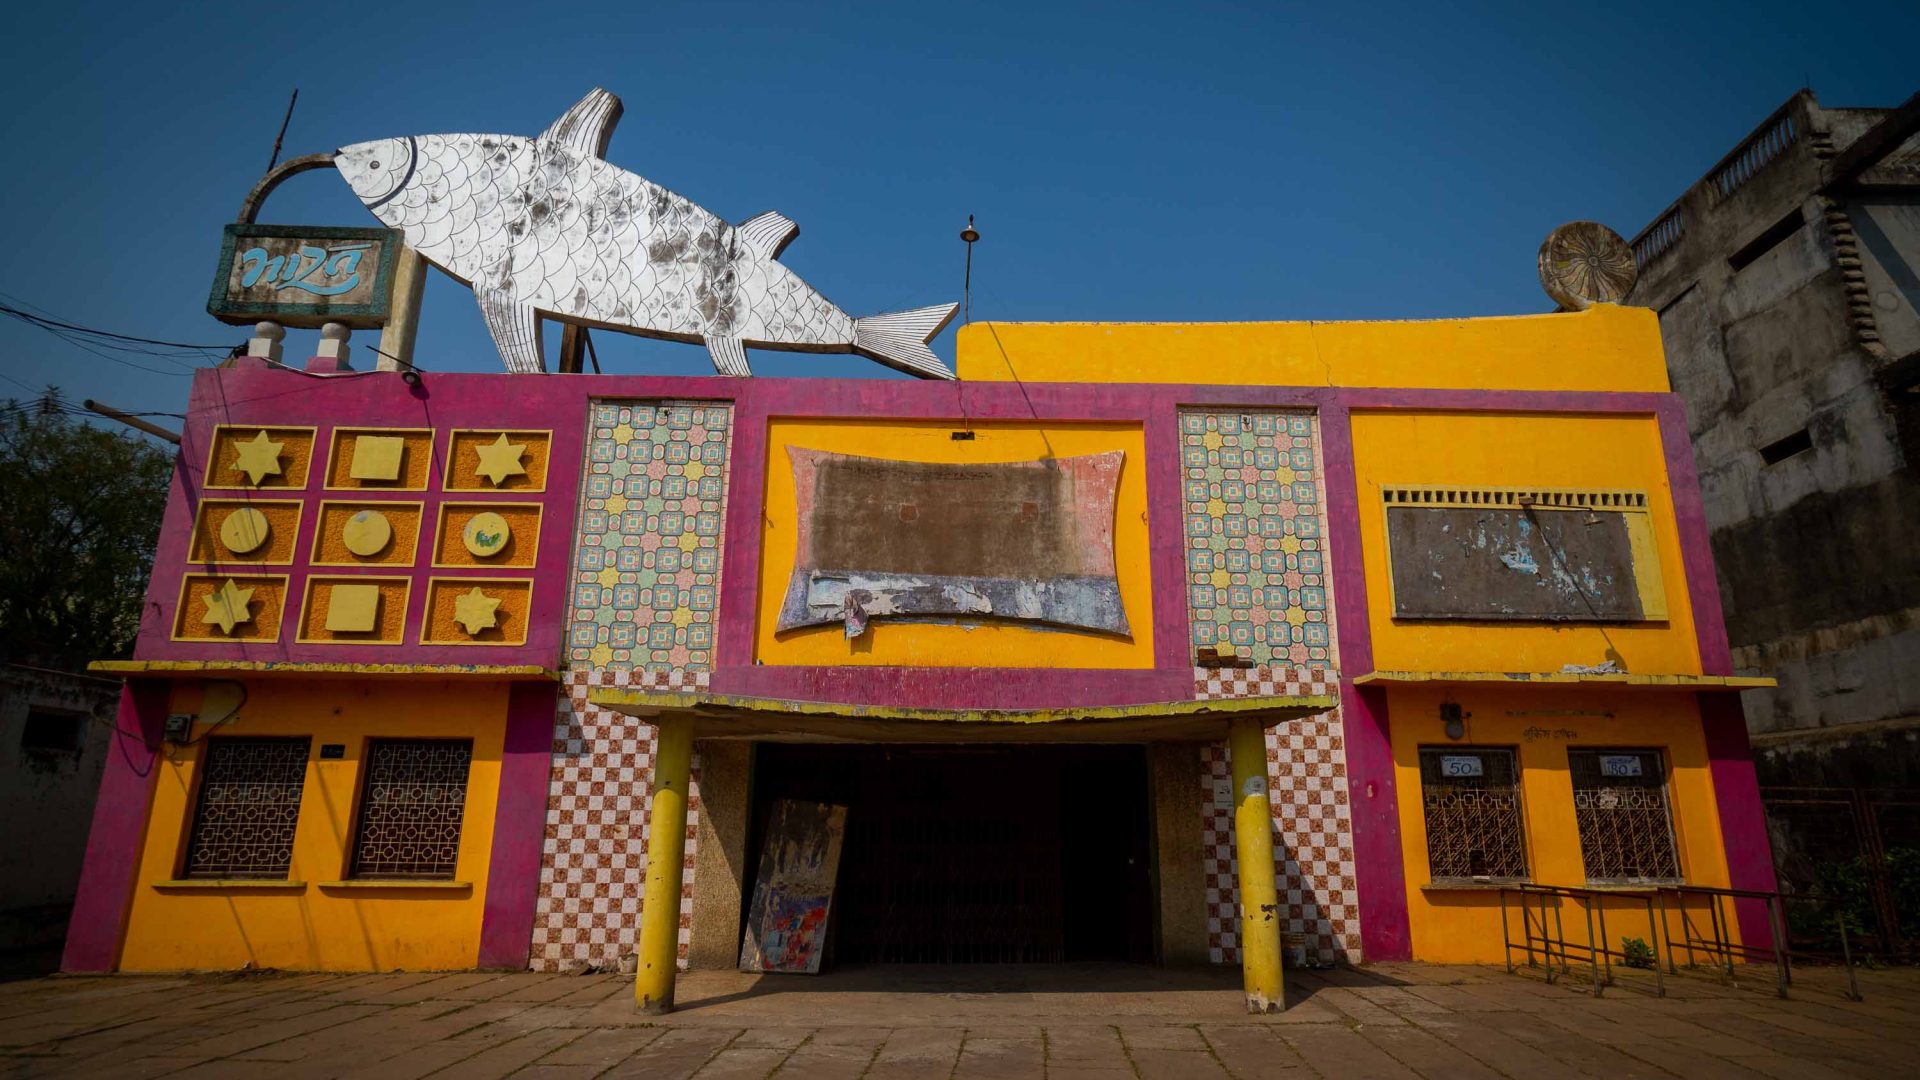 The multiplexes are multiplying, but this photographer is capturing India’s disappearing single-screen cinemas